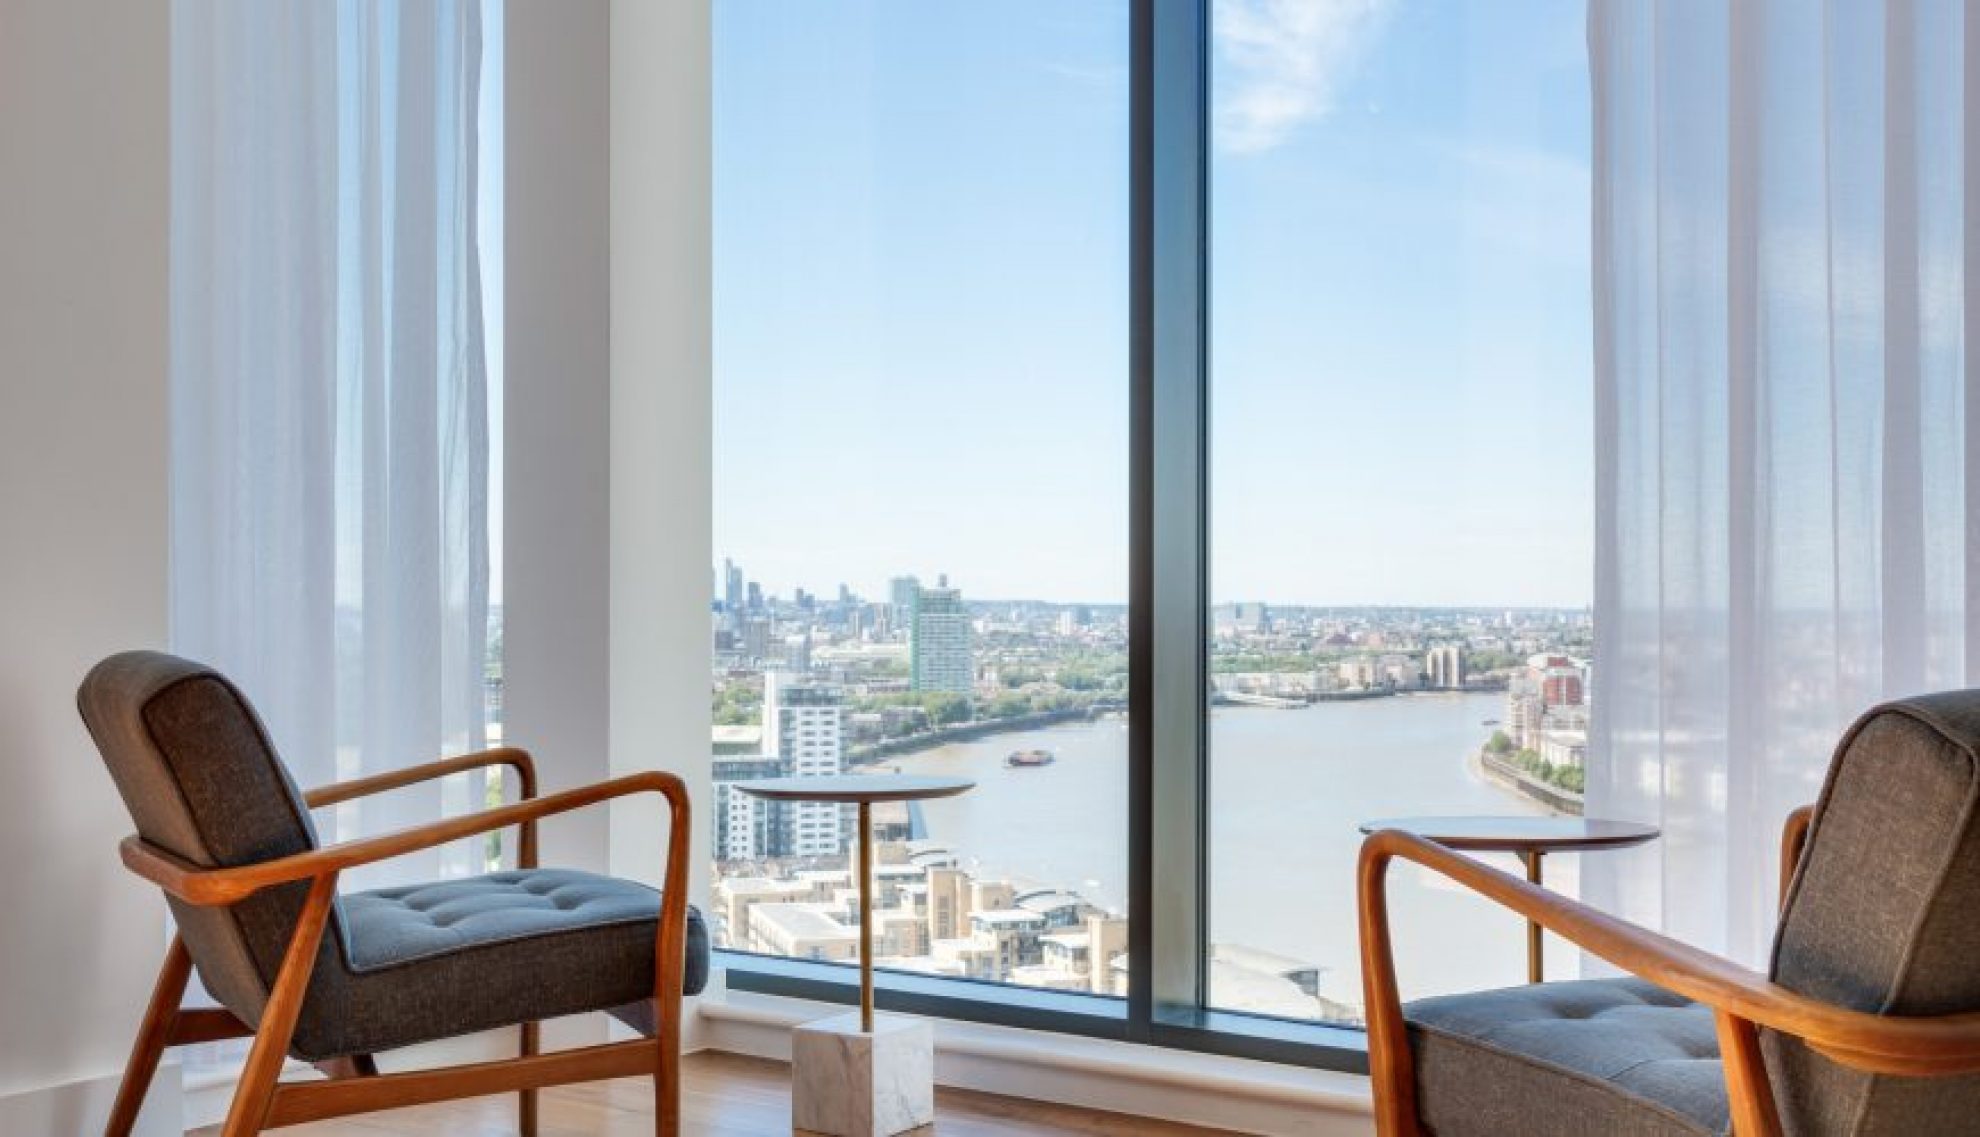 One of the best new builds to rent in London - Union Wharf in Deptford